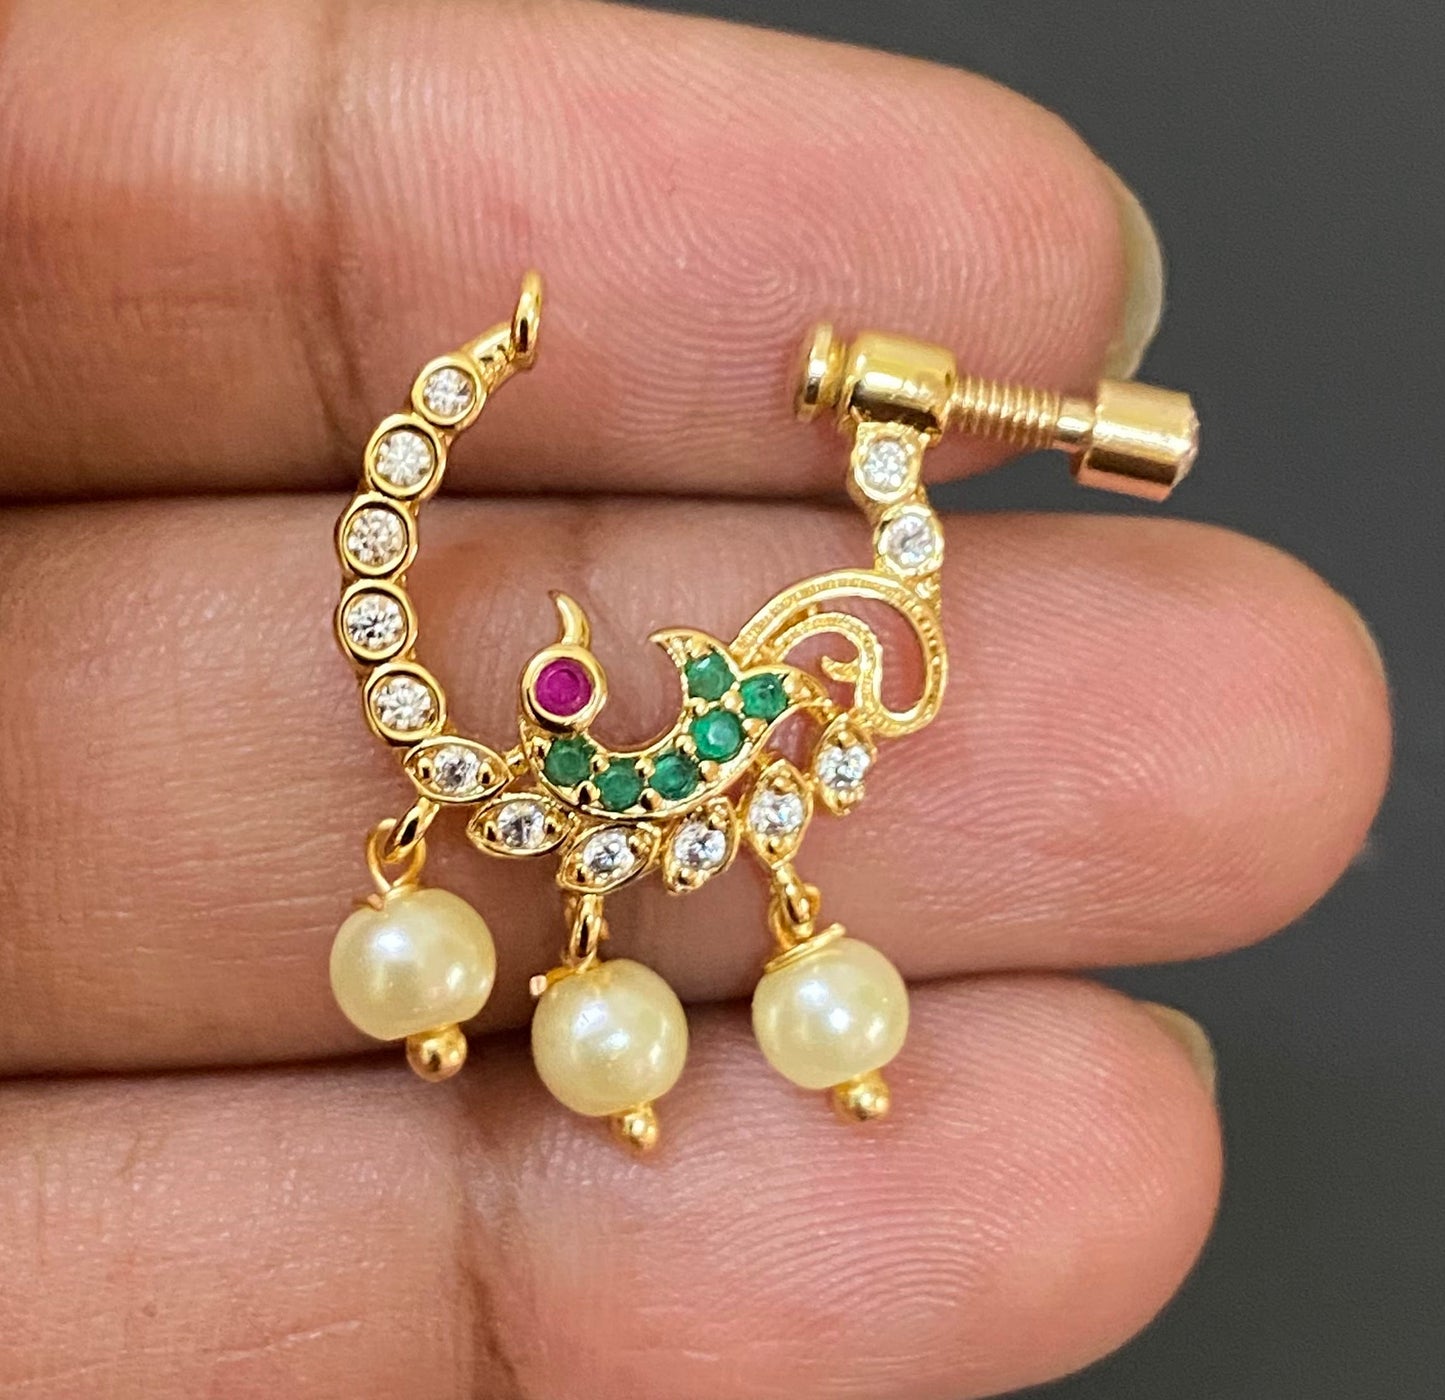 Nose ring | Indian jewelry | Traditional jewelry